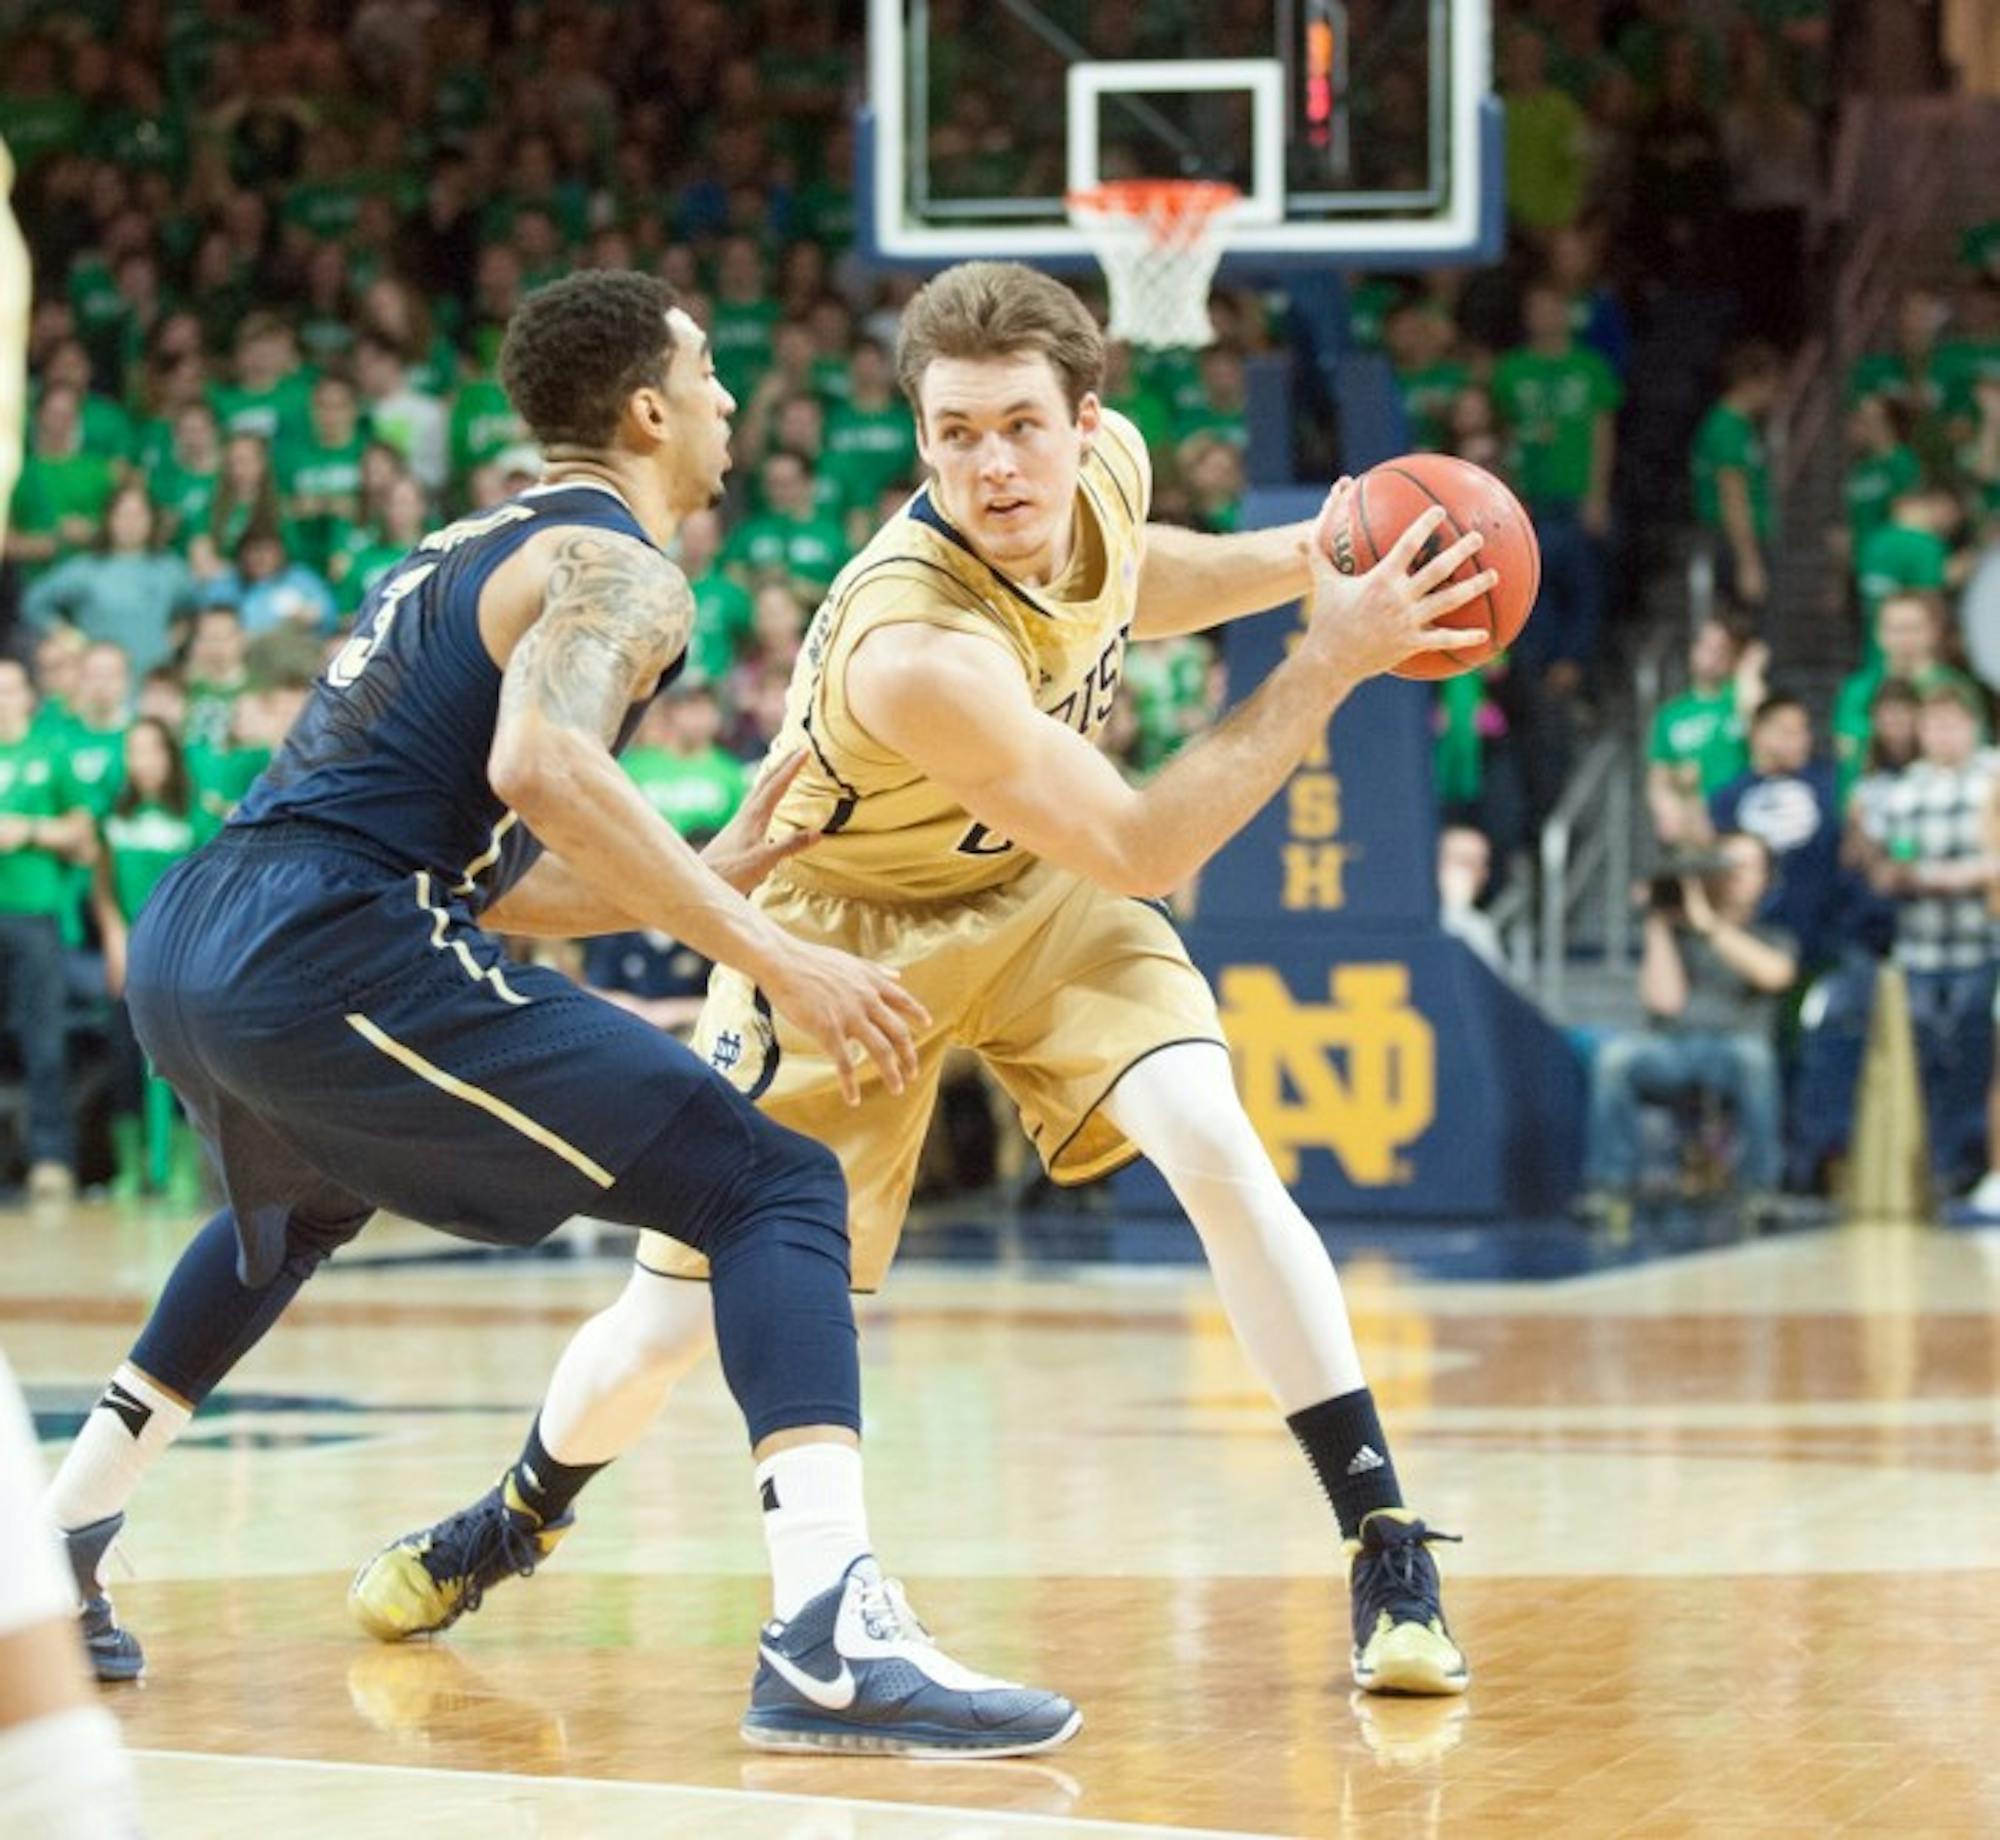 Irish senior forward/guard Pat Connaughton jukes out an opponent during Notre Dame’s 85-81 loss to Pittsburgh on March 1.